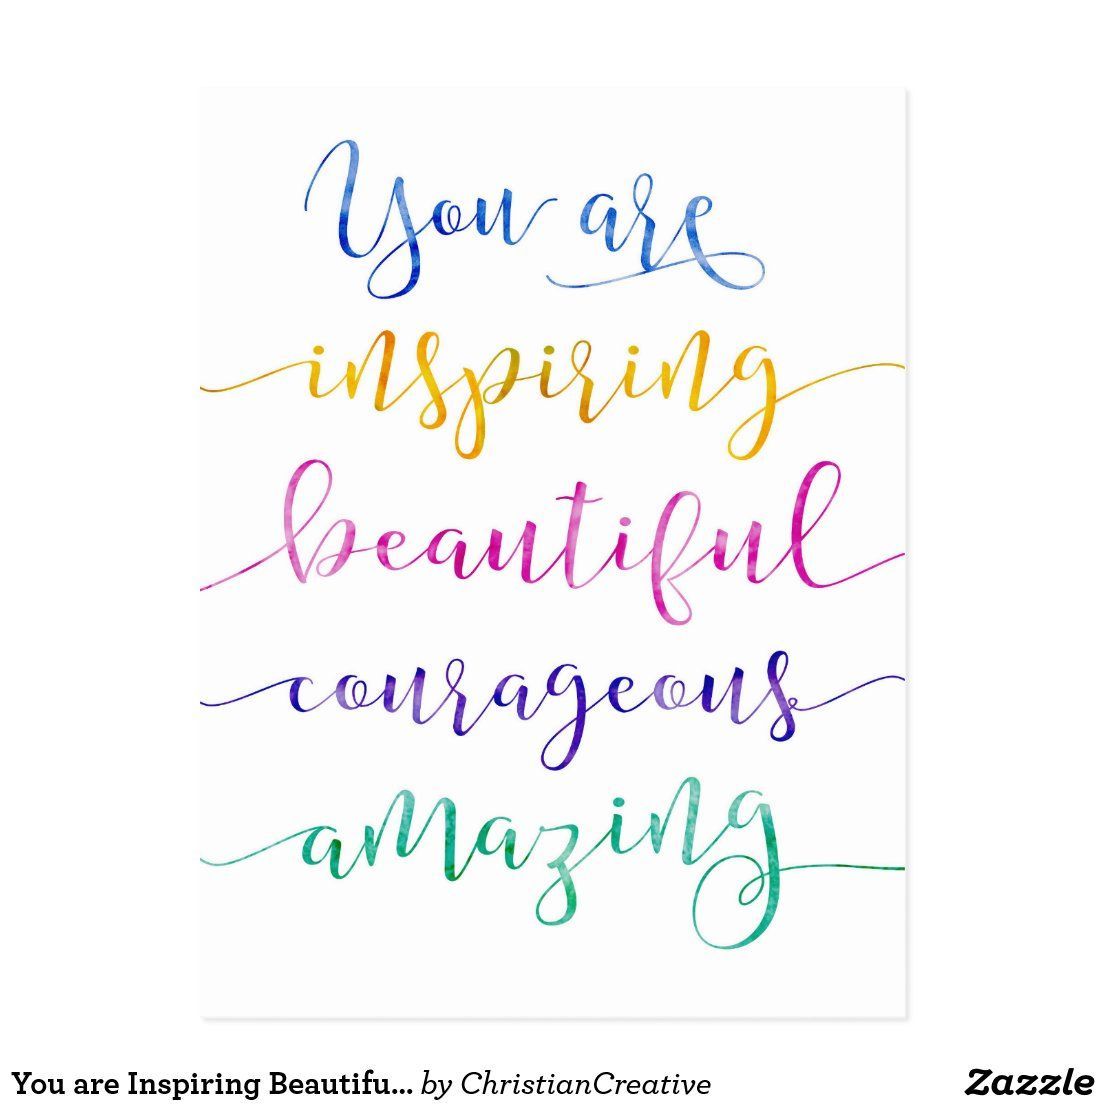 You are Inspiring Beautiful courageous Postcard - You are Inspiring Beautiful courageous Postcard -   18 beauty Day inspiration ideas